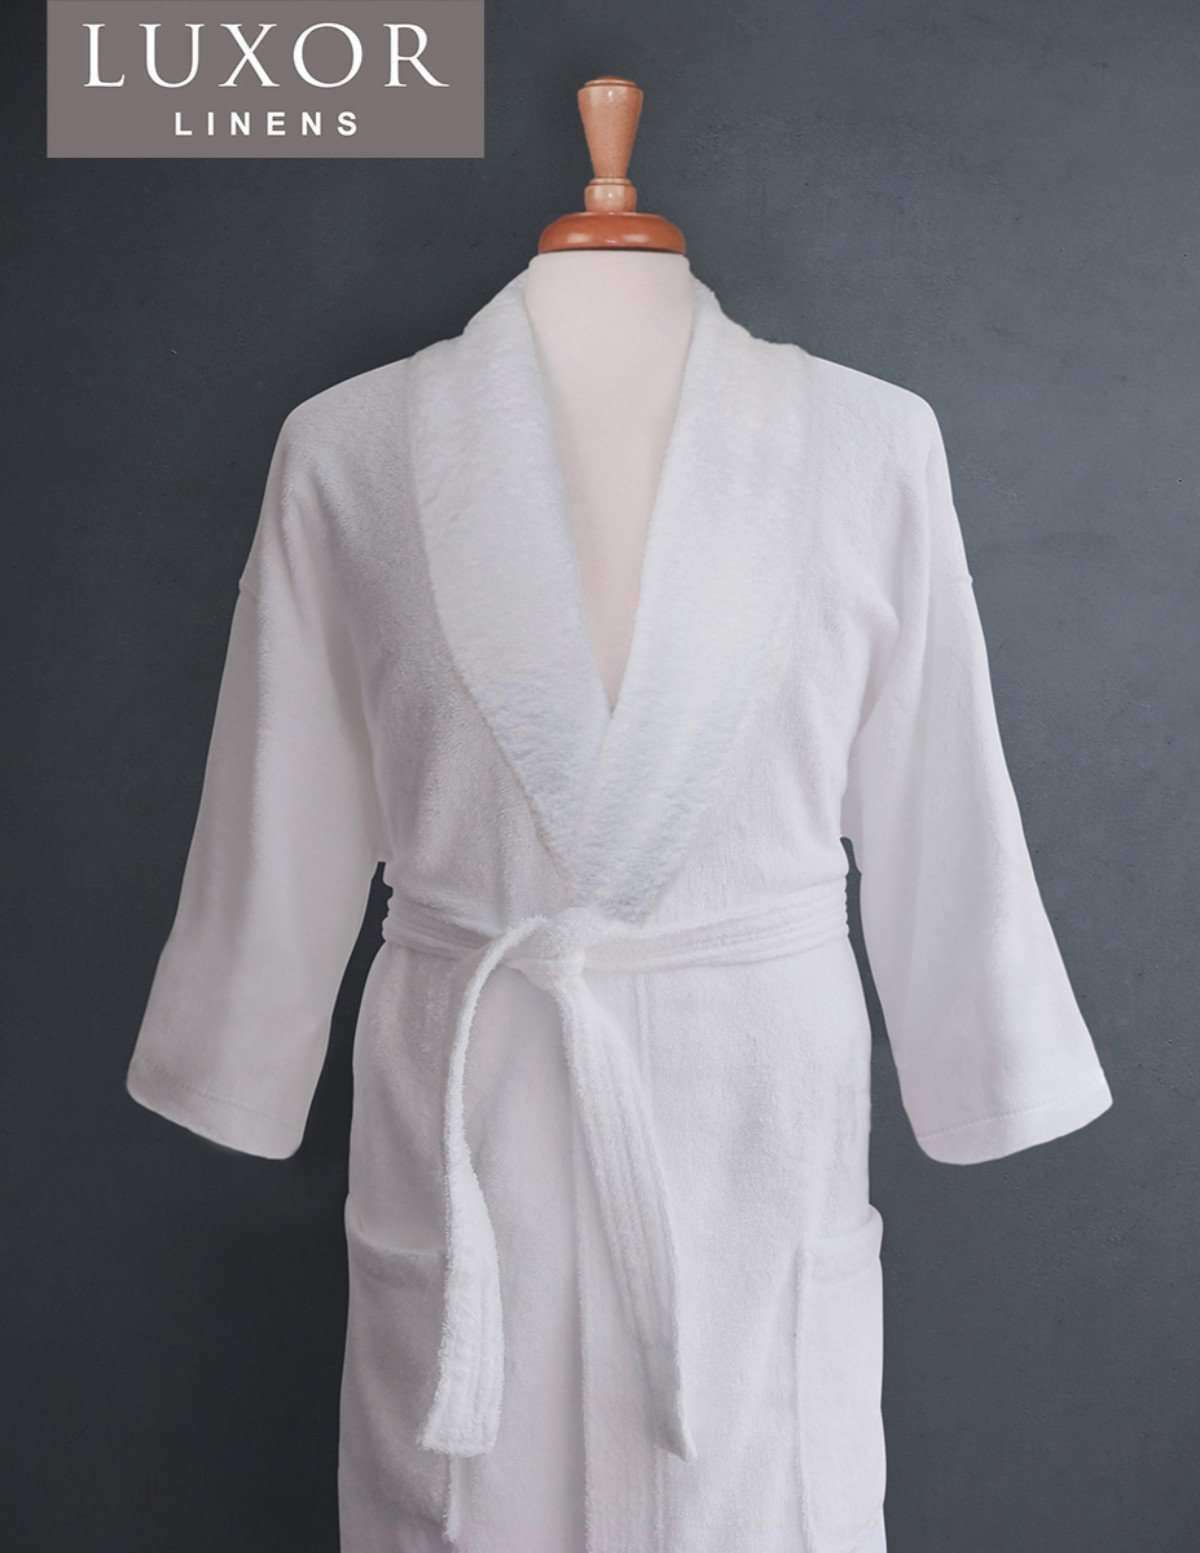 Lakeview Signature Egyptian Cotton Terry Spa Robes